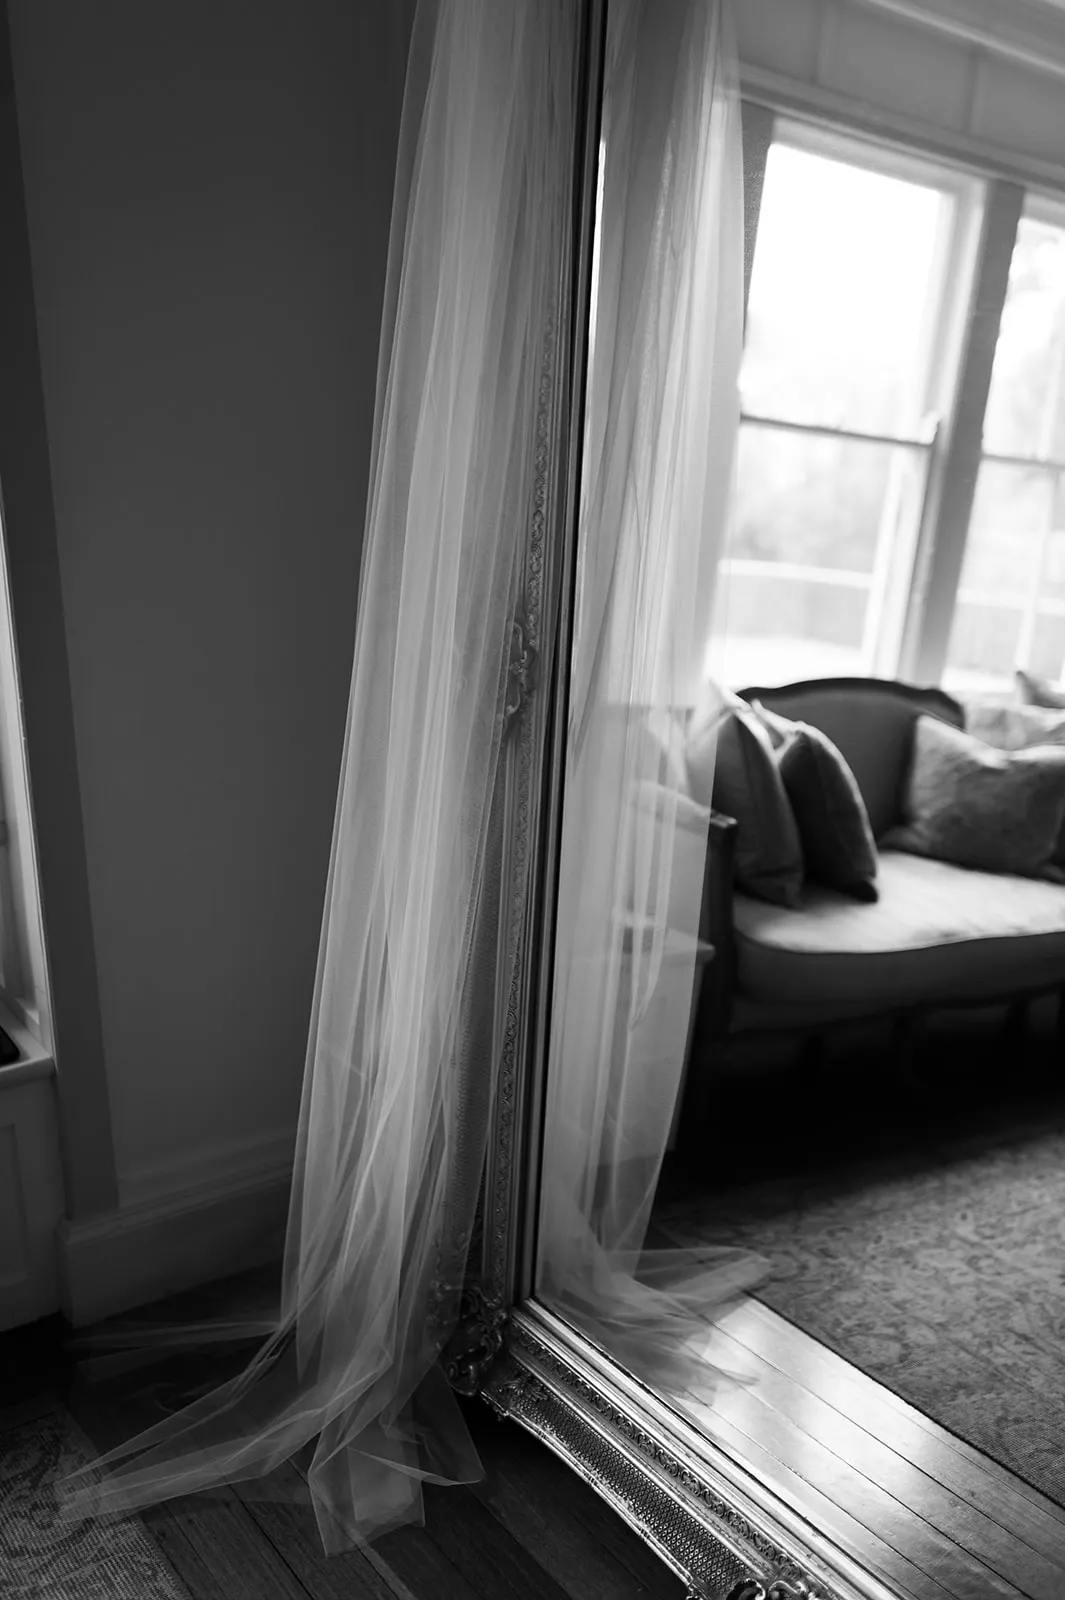 A long, sheer curtain lightly drapes over an ornate, full-length mirror leaning against the wall of a cozy room with a large window. In the background, a cushioned bench with throw pillows sits before the window, casting a soft, inviting ambiance.